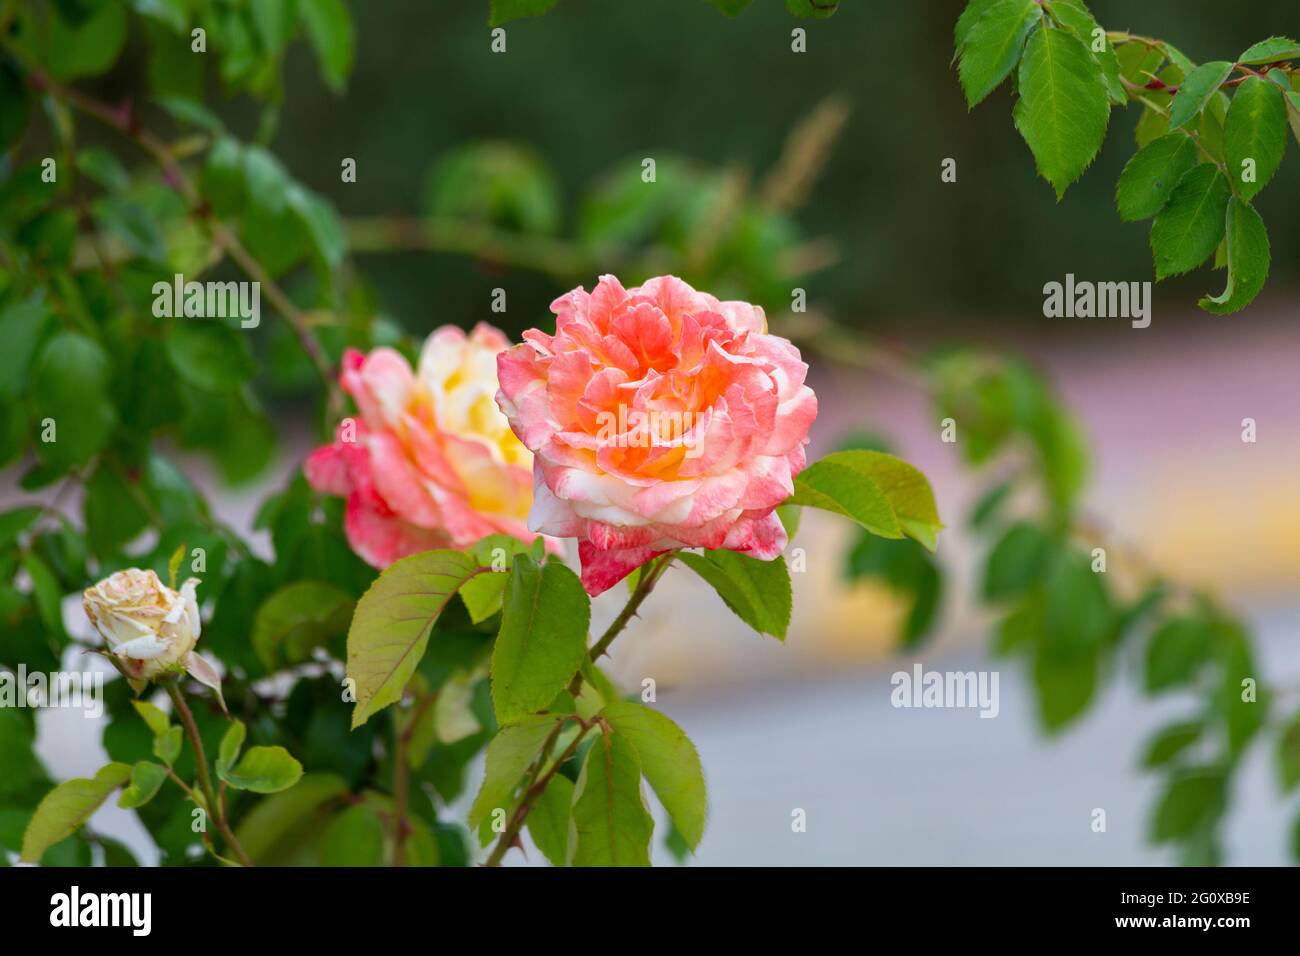 Tea Rose, a species of roses, also known as Miniature rose, botanical name is Rosa hybrida. Stock Photo